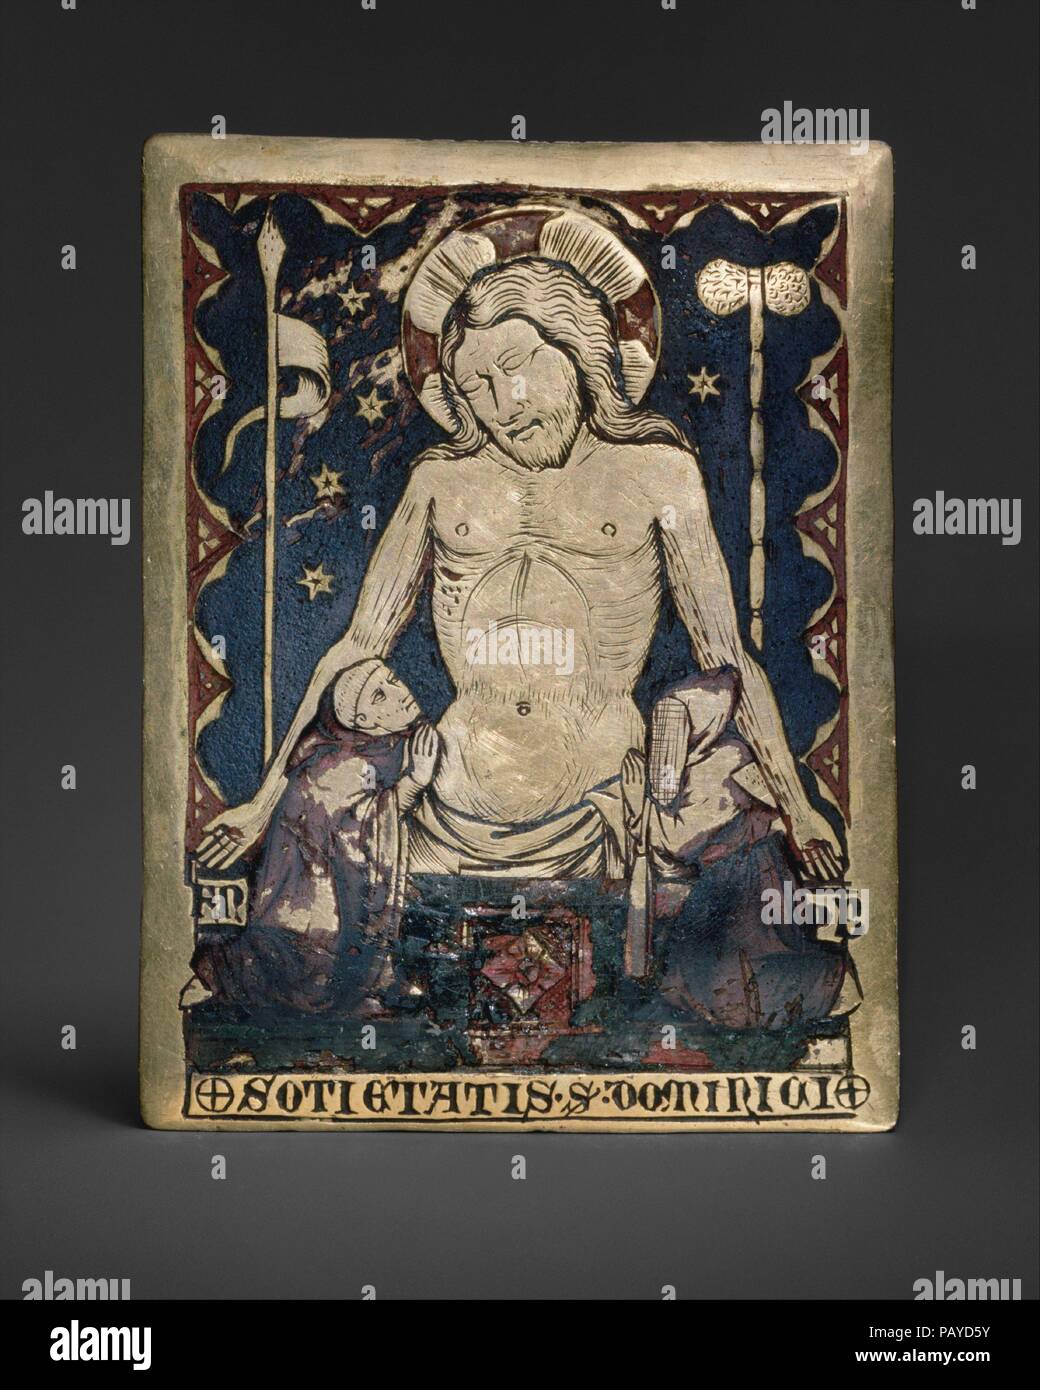 The Man of Sorrows. Culture: Italian. Dimensions: Overall: 4 1/8 x 3 1/8 x 1/16 in. (10.4 x 8 x 0.2 cm). Date: last quarter 14th century.  A monk and a hooded figure, his back bared so that he can whip himself in penitence, kneel before a dreamlike vision of Jesus rising from his tomb. This plaque, with an inscription naming the society of Saint Dominic, was probably intended for private prayer by a member of a Dominican brotherhood.  Focus on the crucified Christ and his suffering was widespread in the 1300s. Pope John XXII (reigned 1316-34) declared that the Imago pietatis should be evoked d Stock Photo